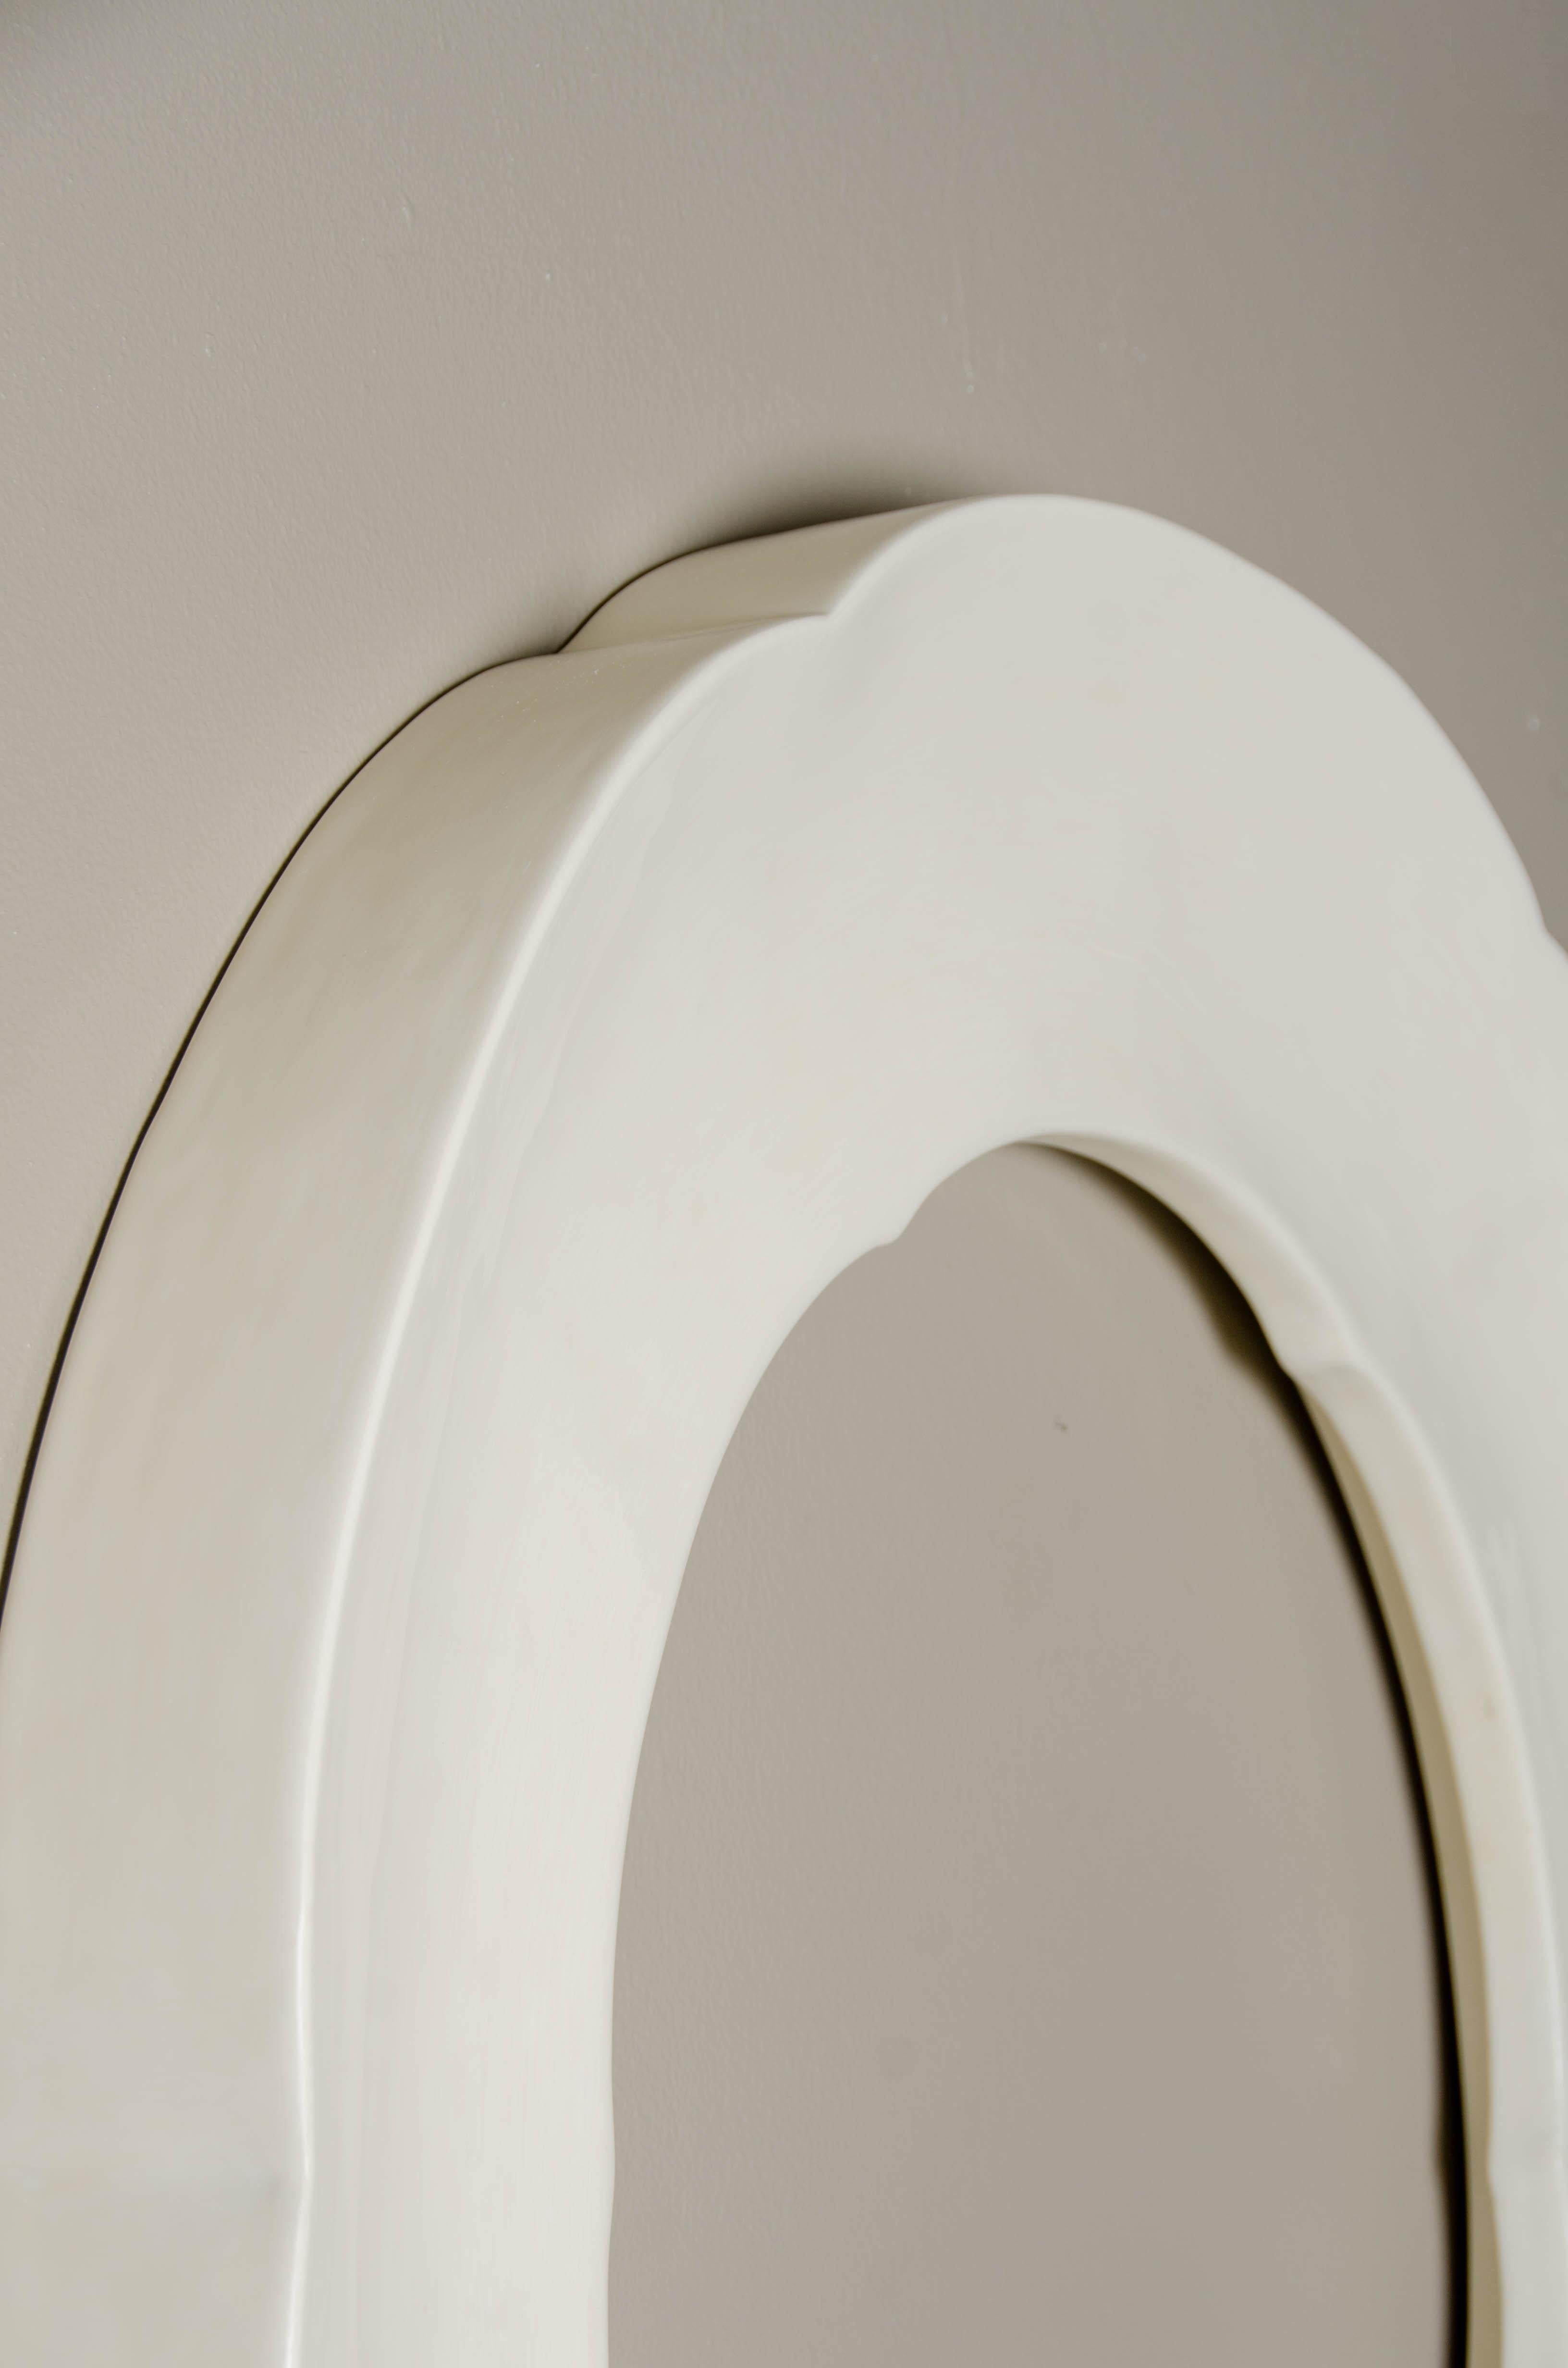 Contemporary Six Petal Mirror, Cream Lacquer by Robert Kuo, Limited Edition